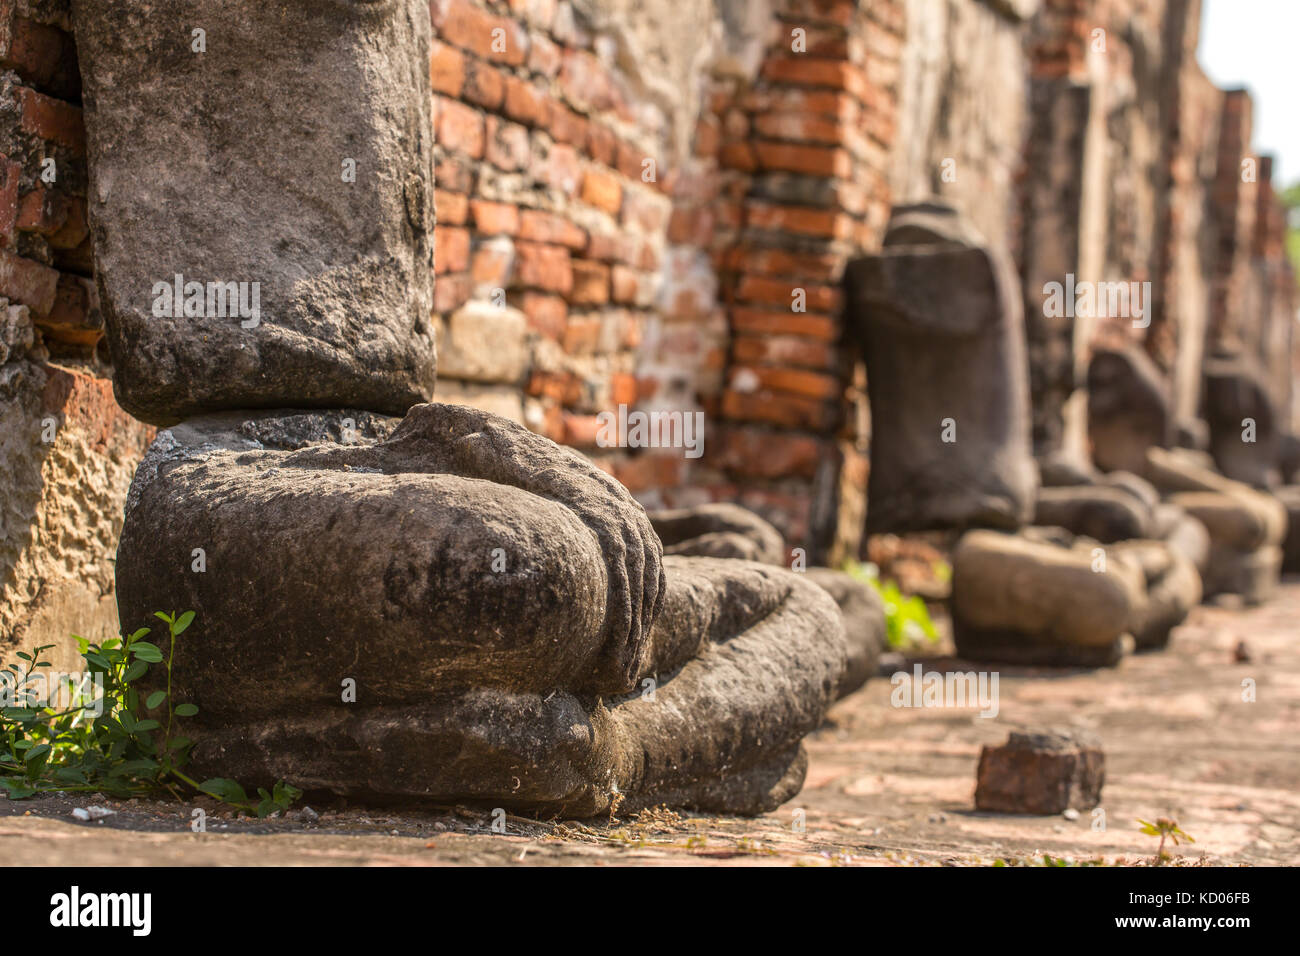 Detail of many headless Buddhas along a temple wall at Wat Mahathat, Temple of the Great Relic, in Ayutthaya, Thailand Stock Photo